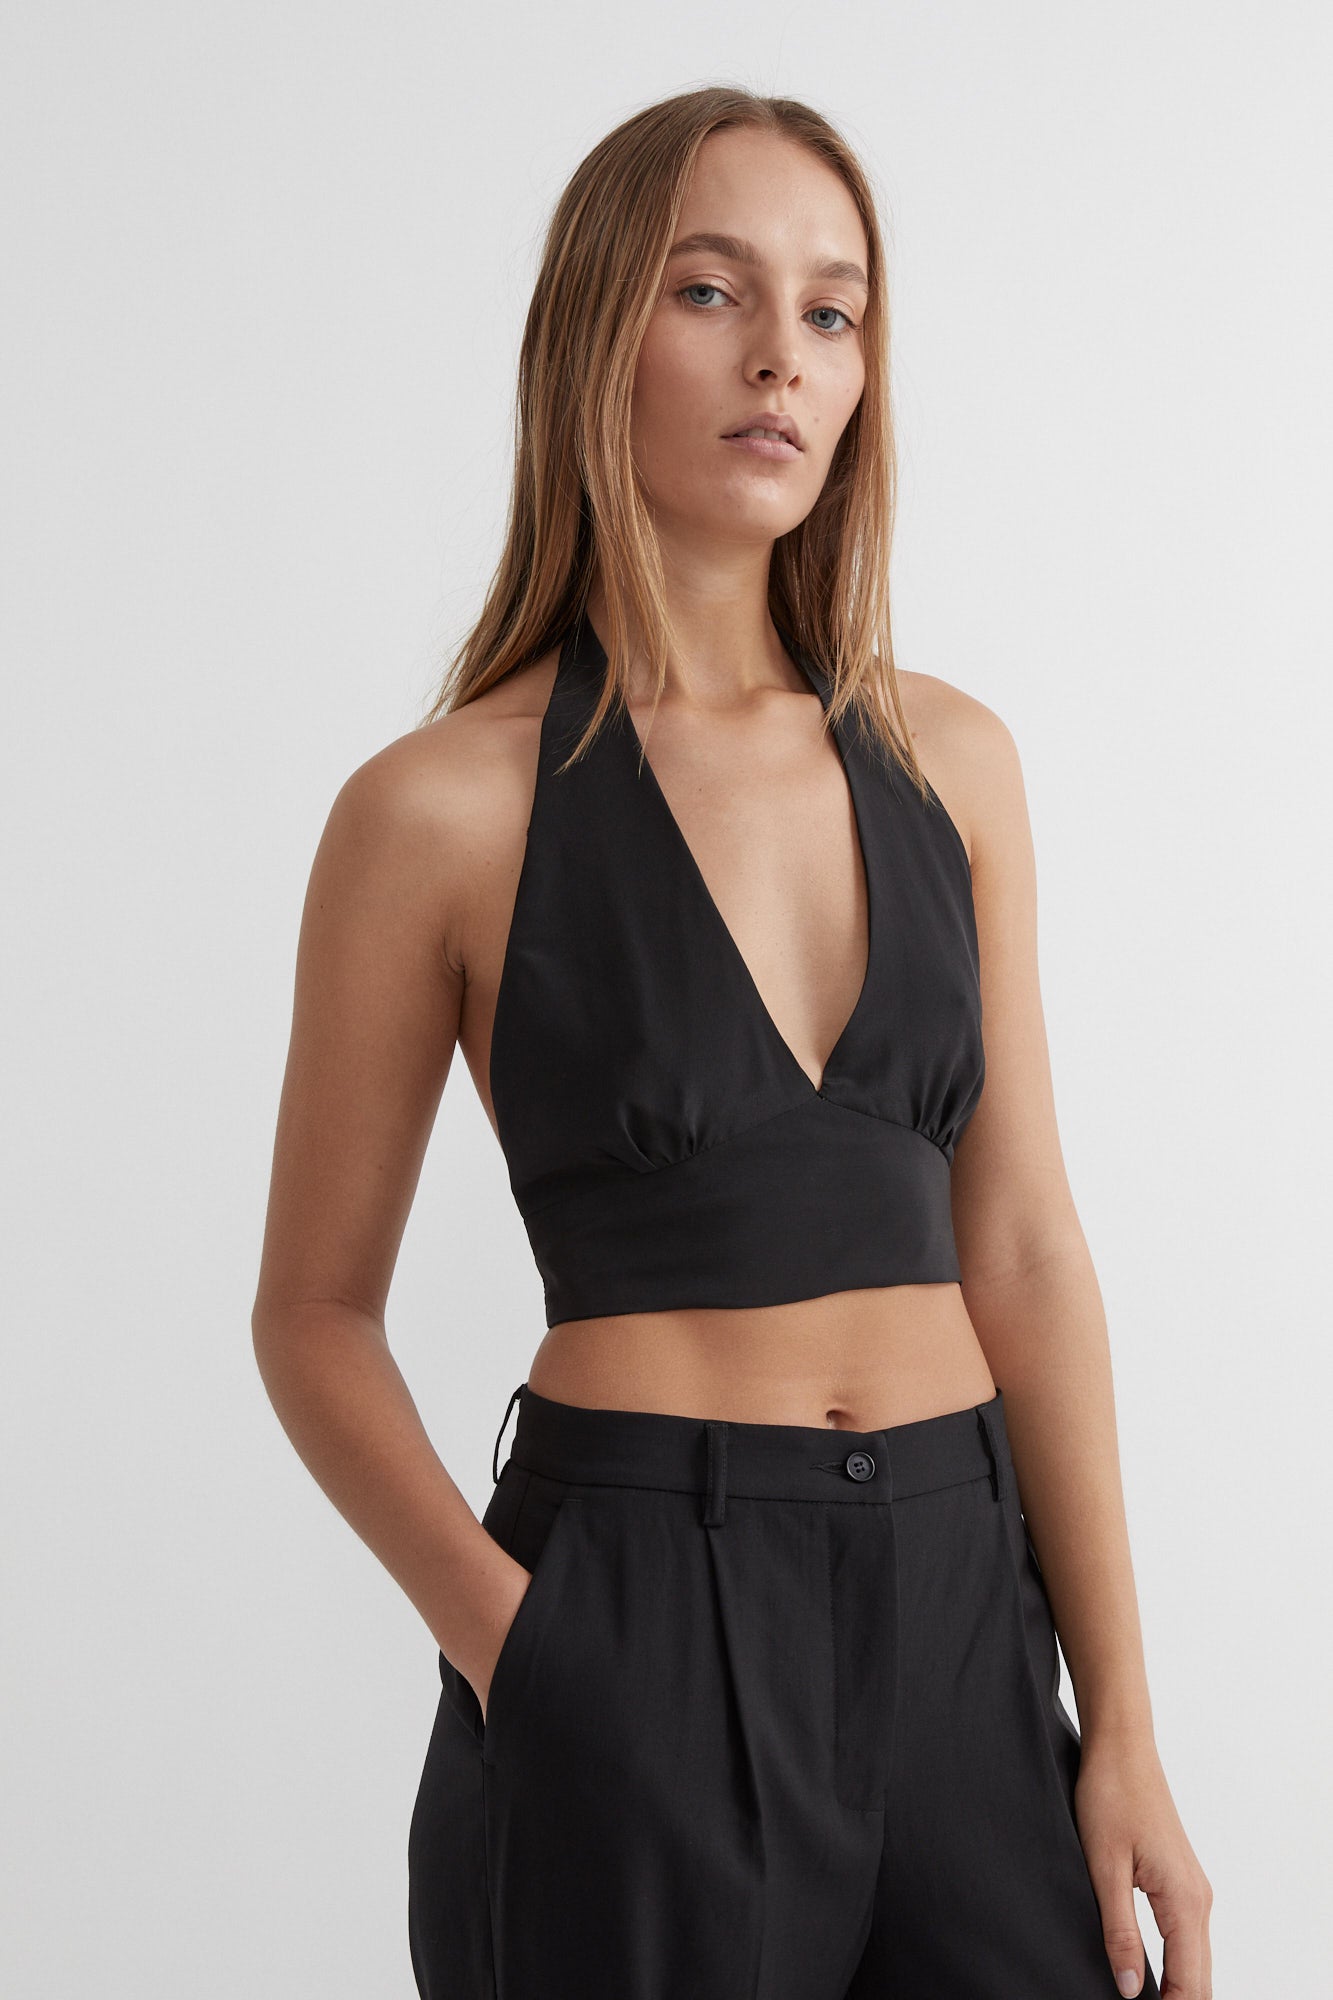 SAINT Lookbook Silk Tie-up Top black backless going out / party top. Made in Australia